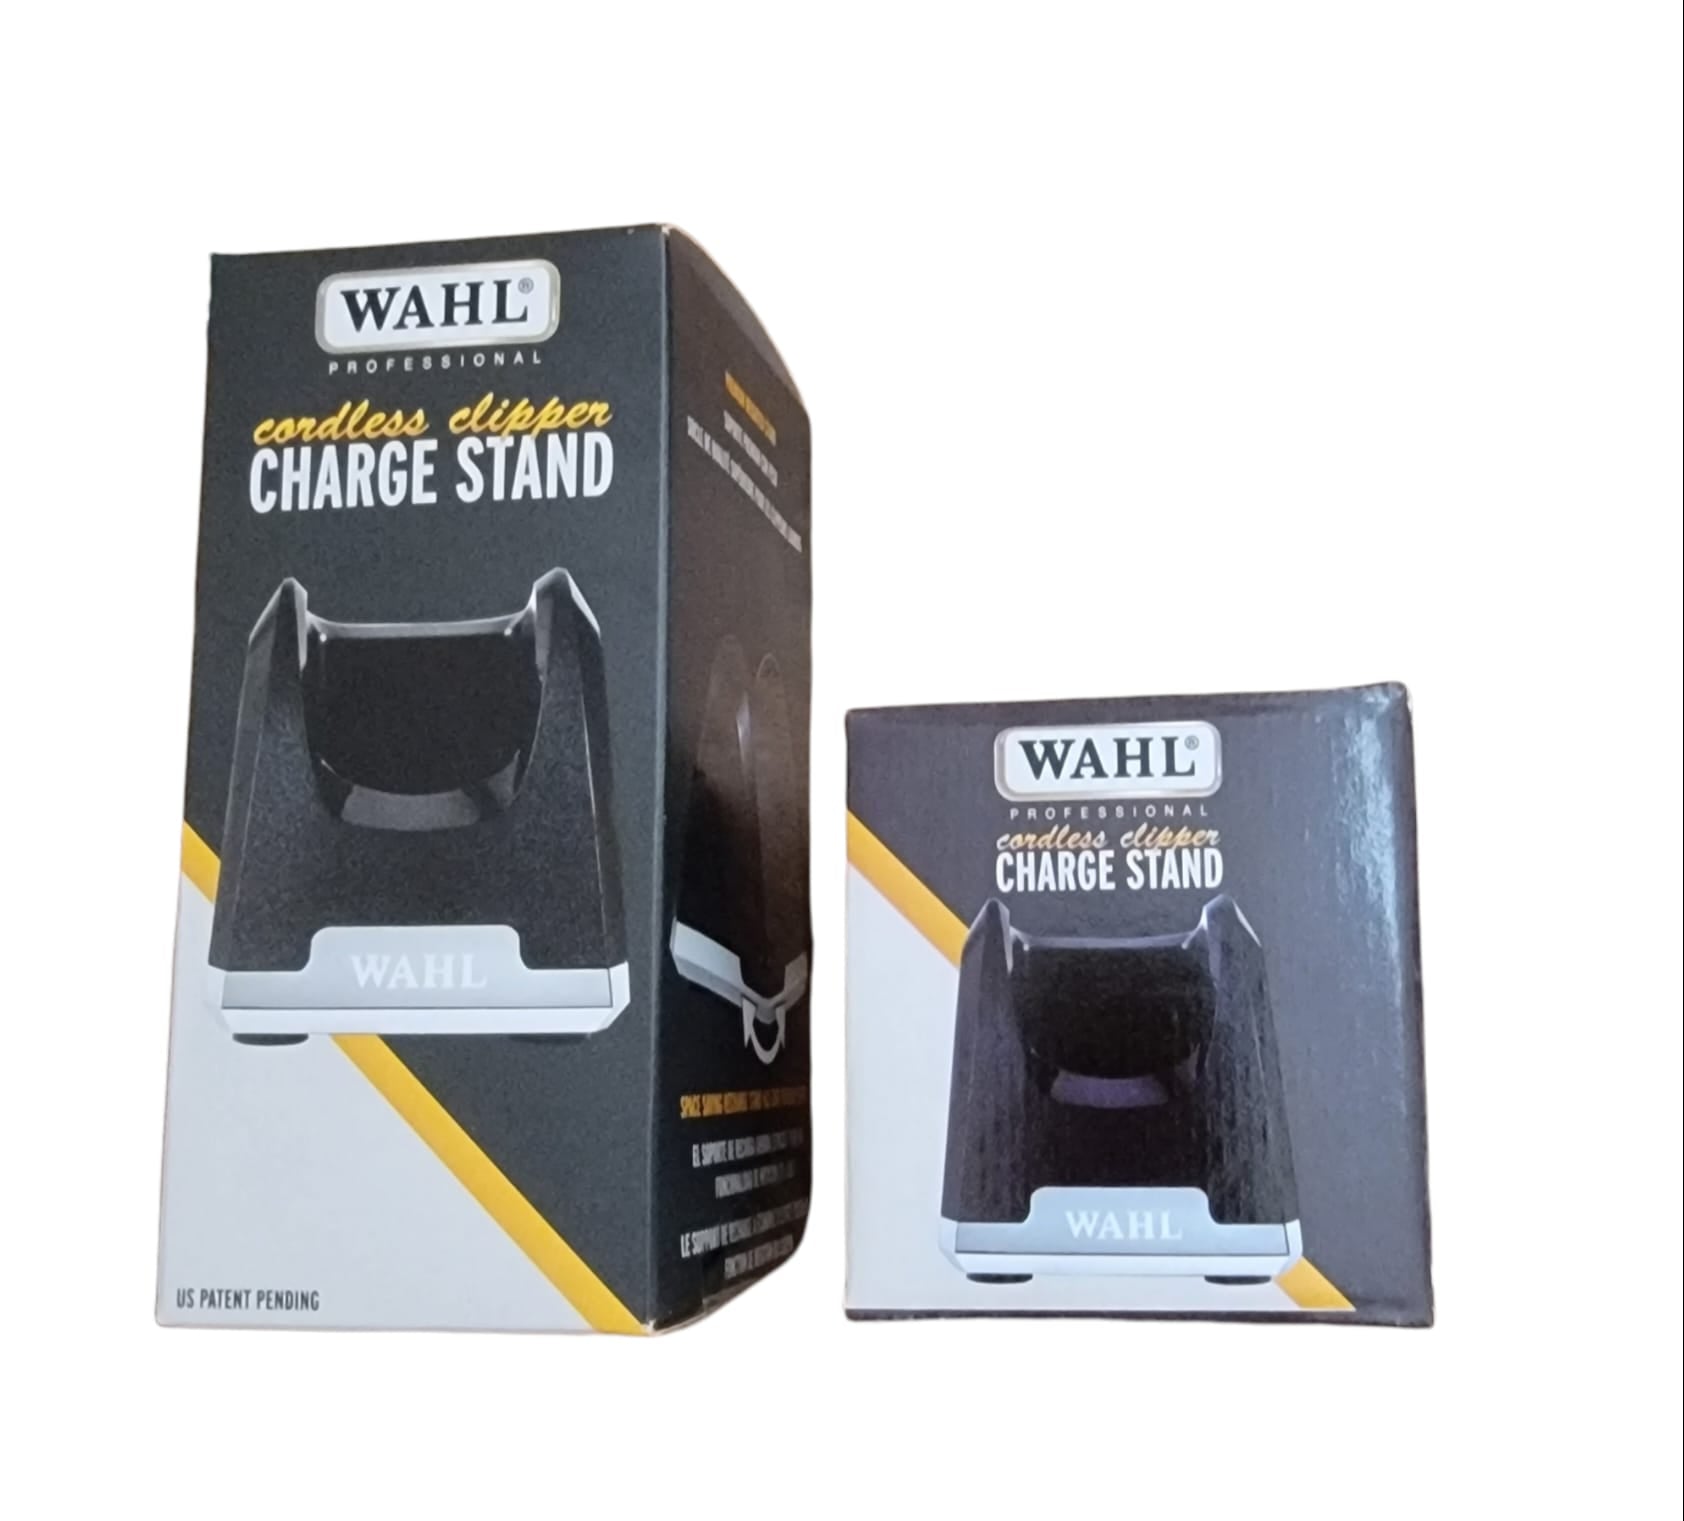 wahl Cordless Clipper Charge Stand #3801